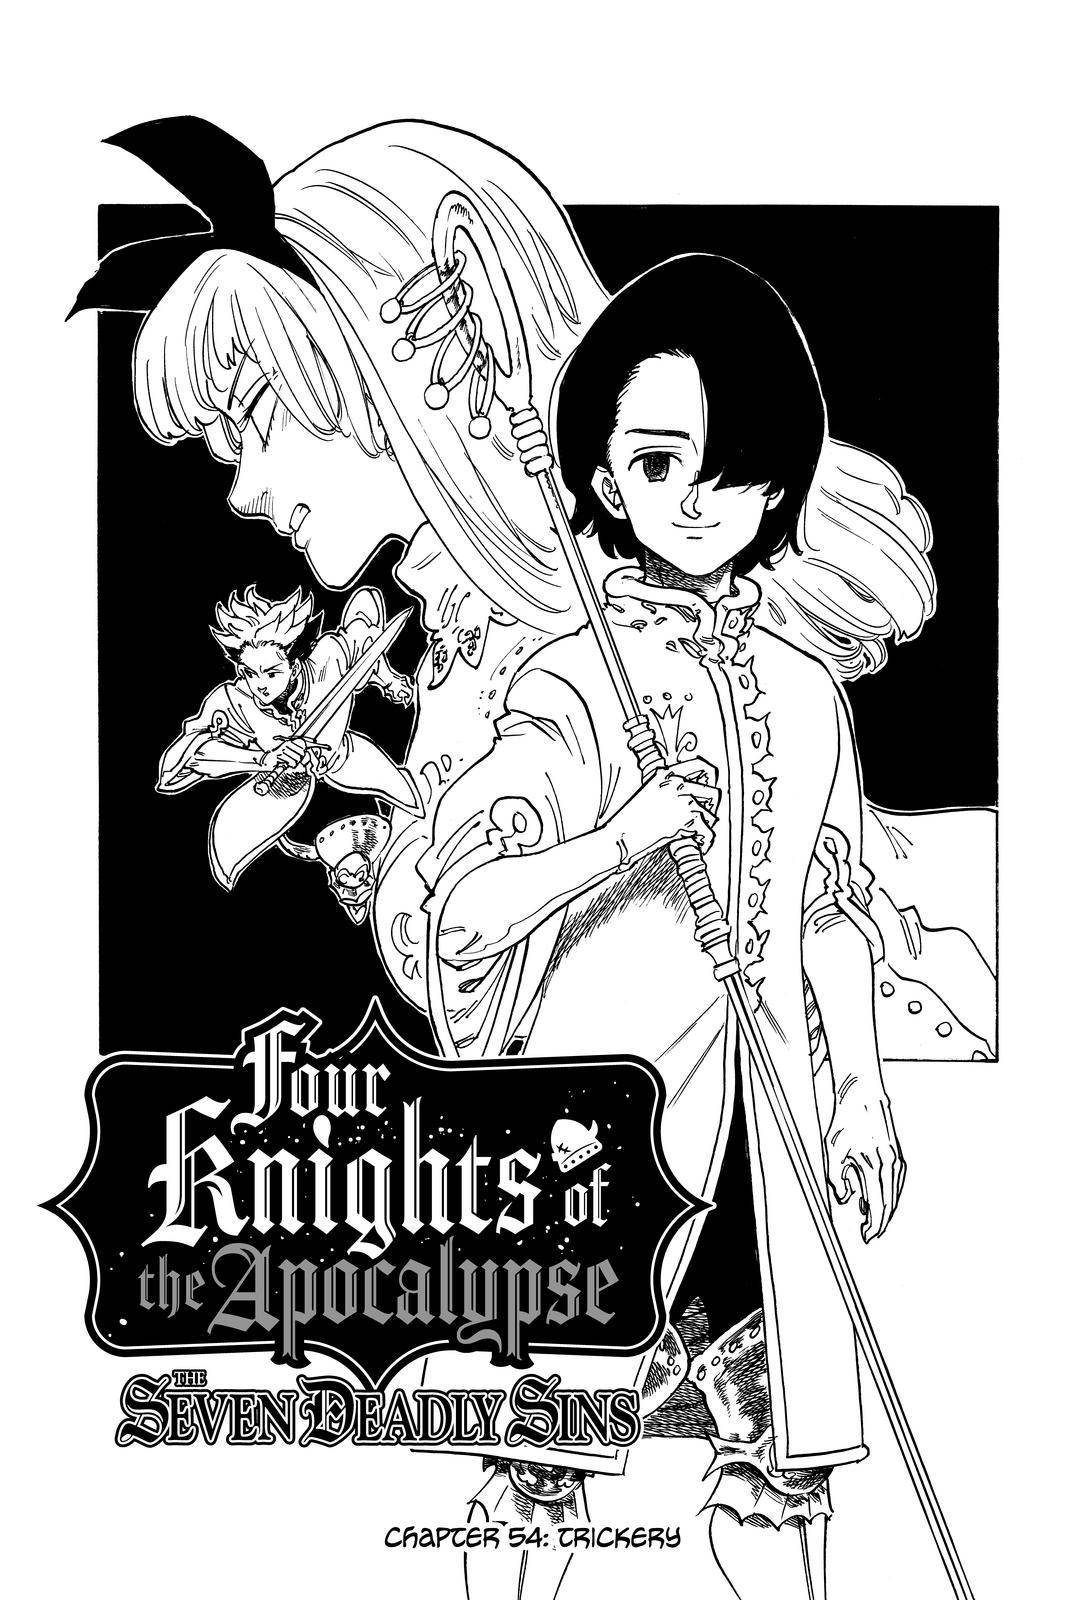 The Seven Deadly Sins: Four Knights of the Apocalypse Chapter 54